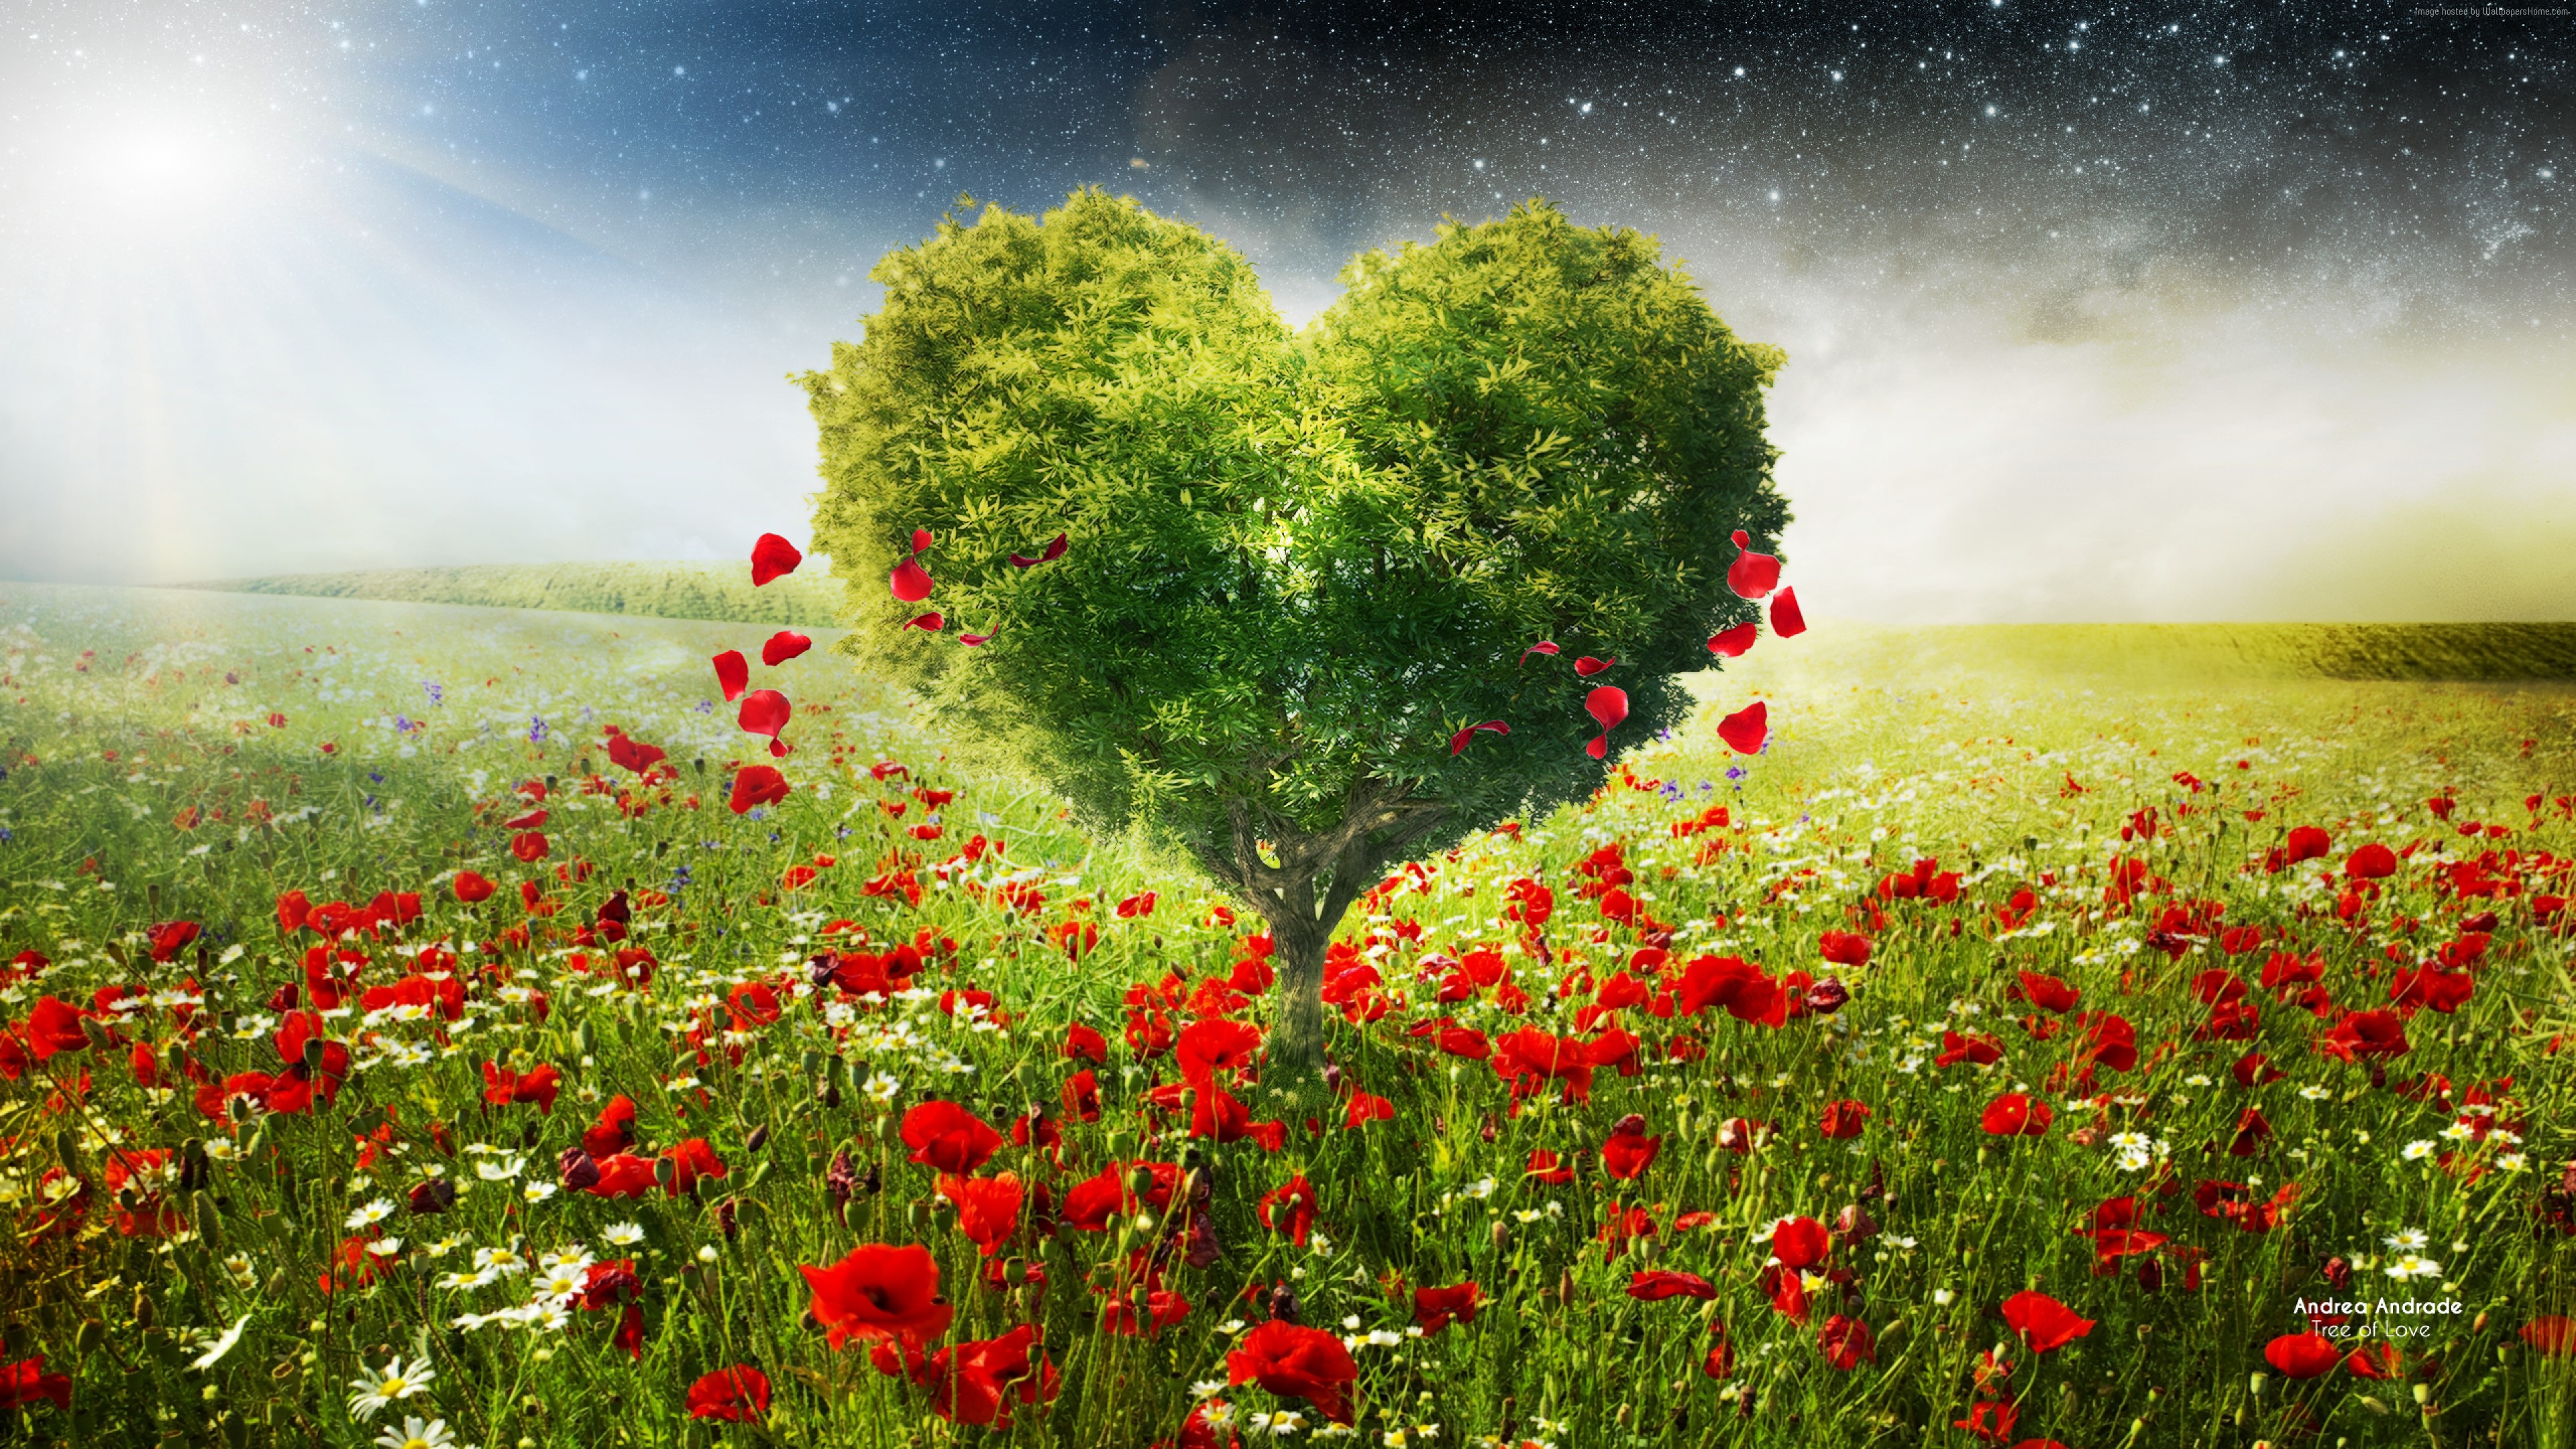 Stock Images love image, heart, HD, tree, Stock Images